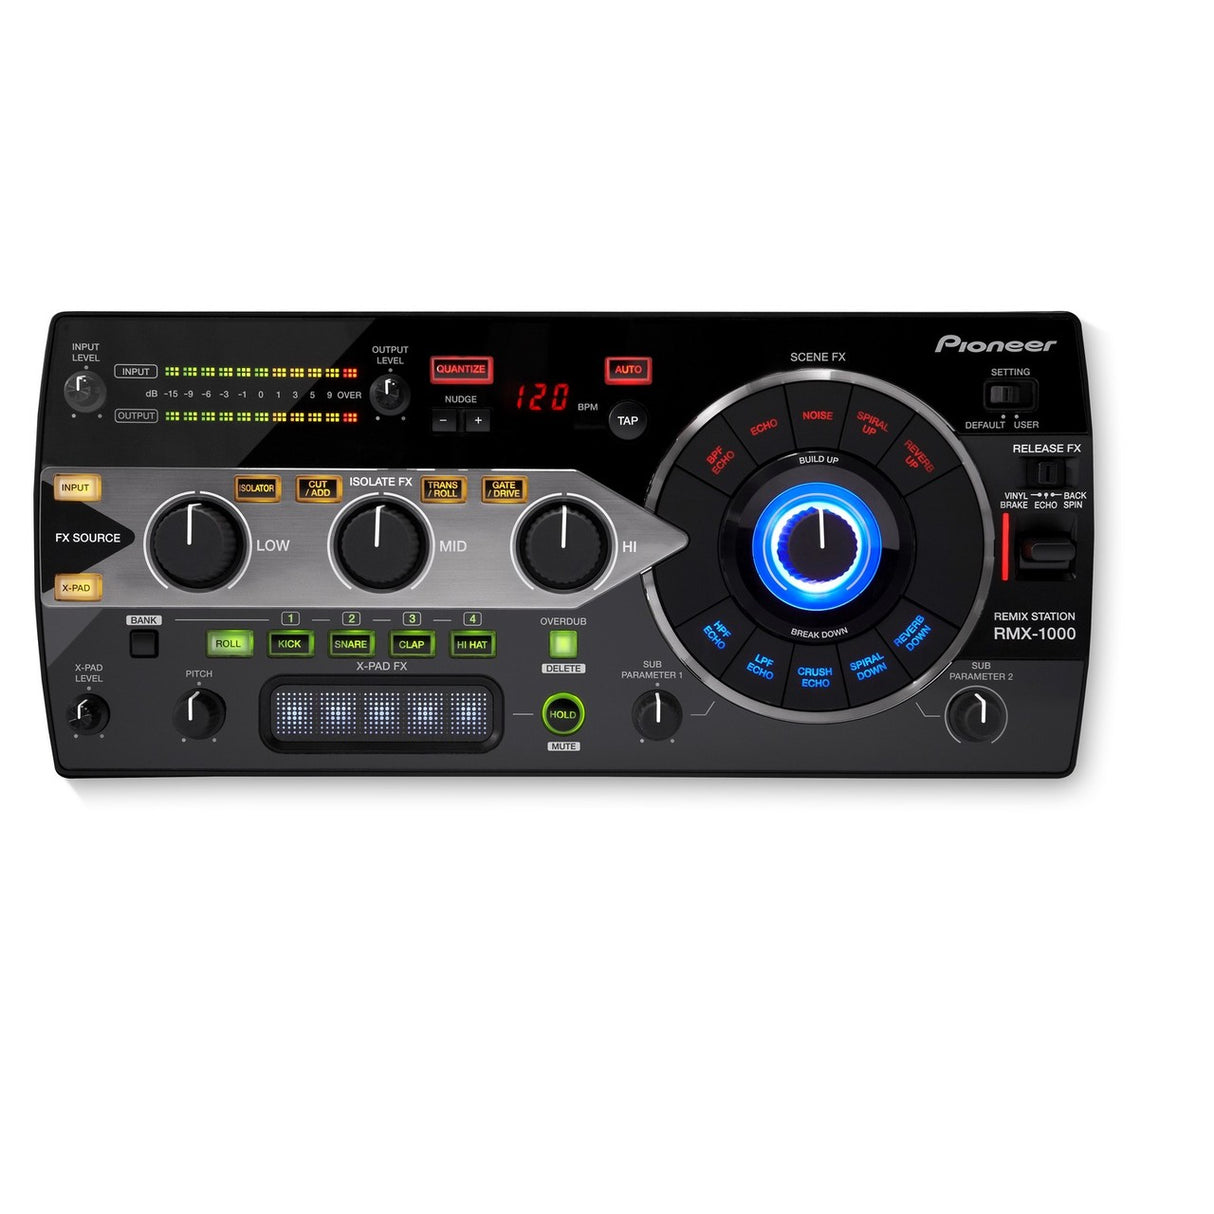 Pioneer RMX-1000 | 3 in 1 Remix Station for Editing and Controlling Black